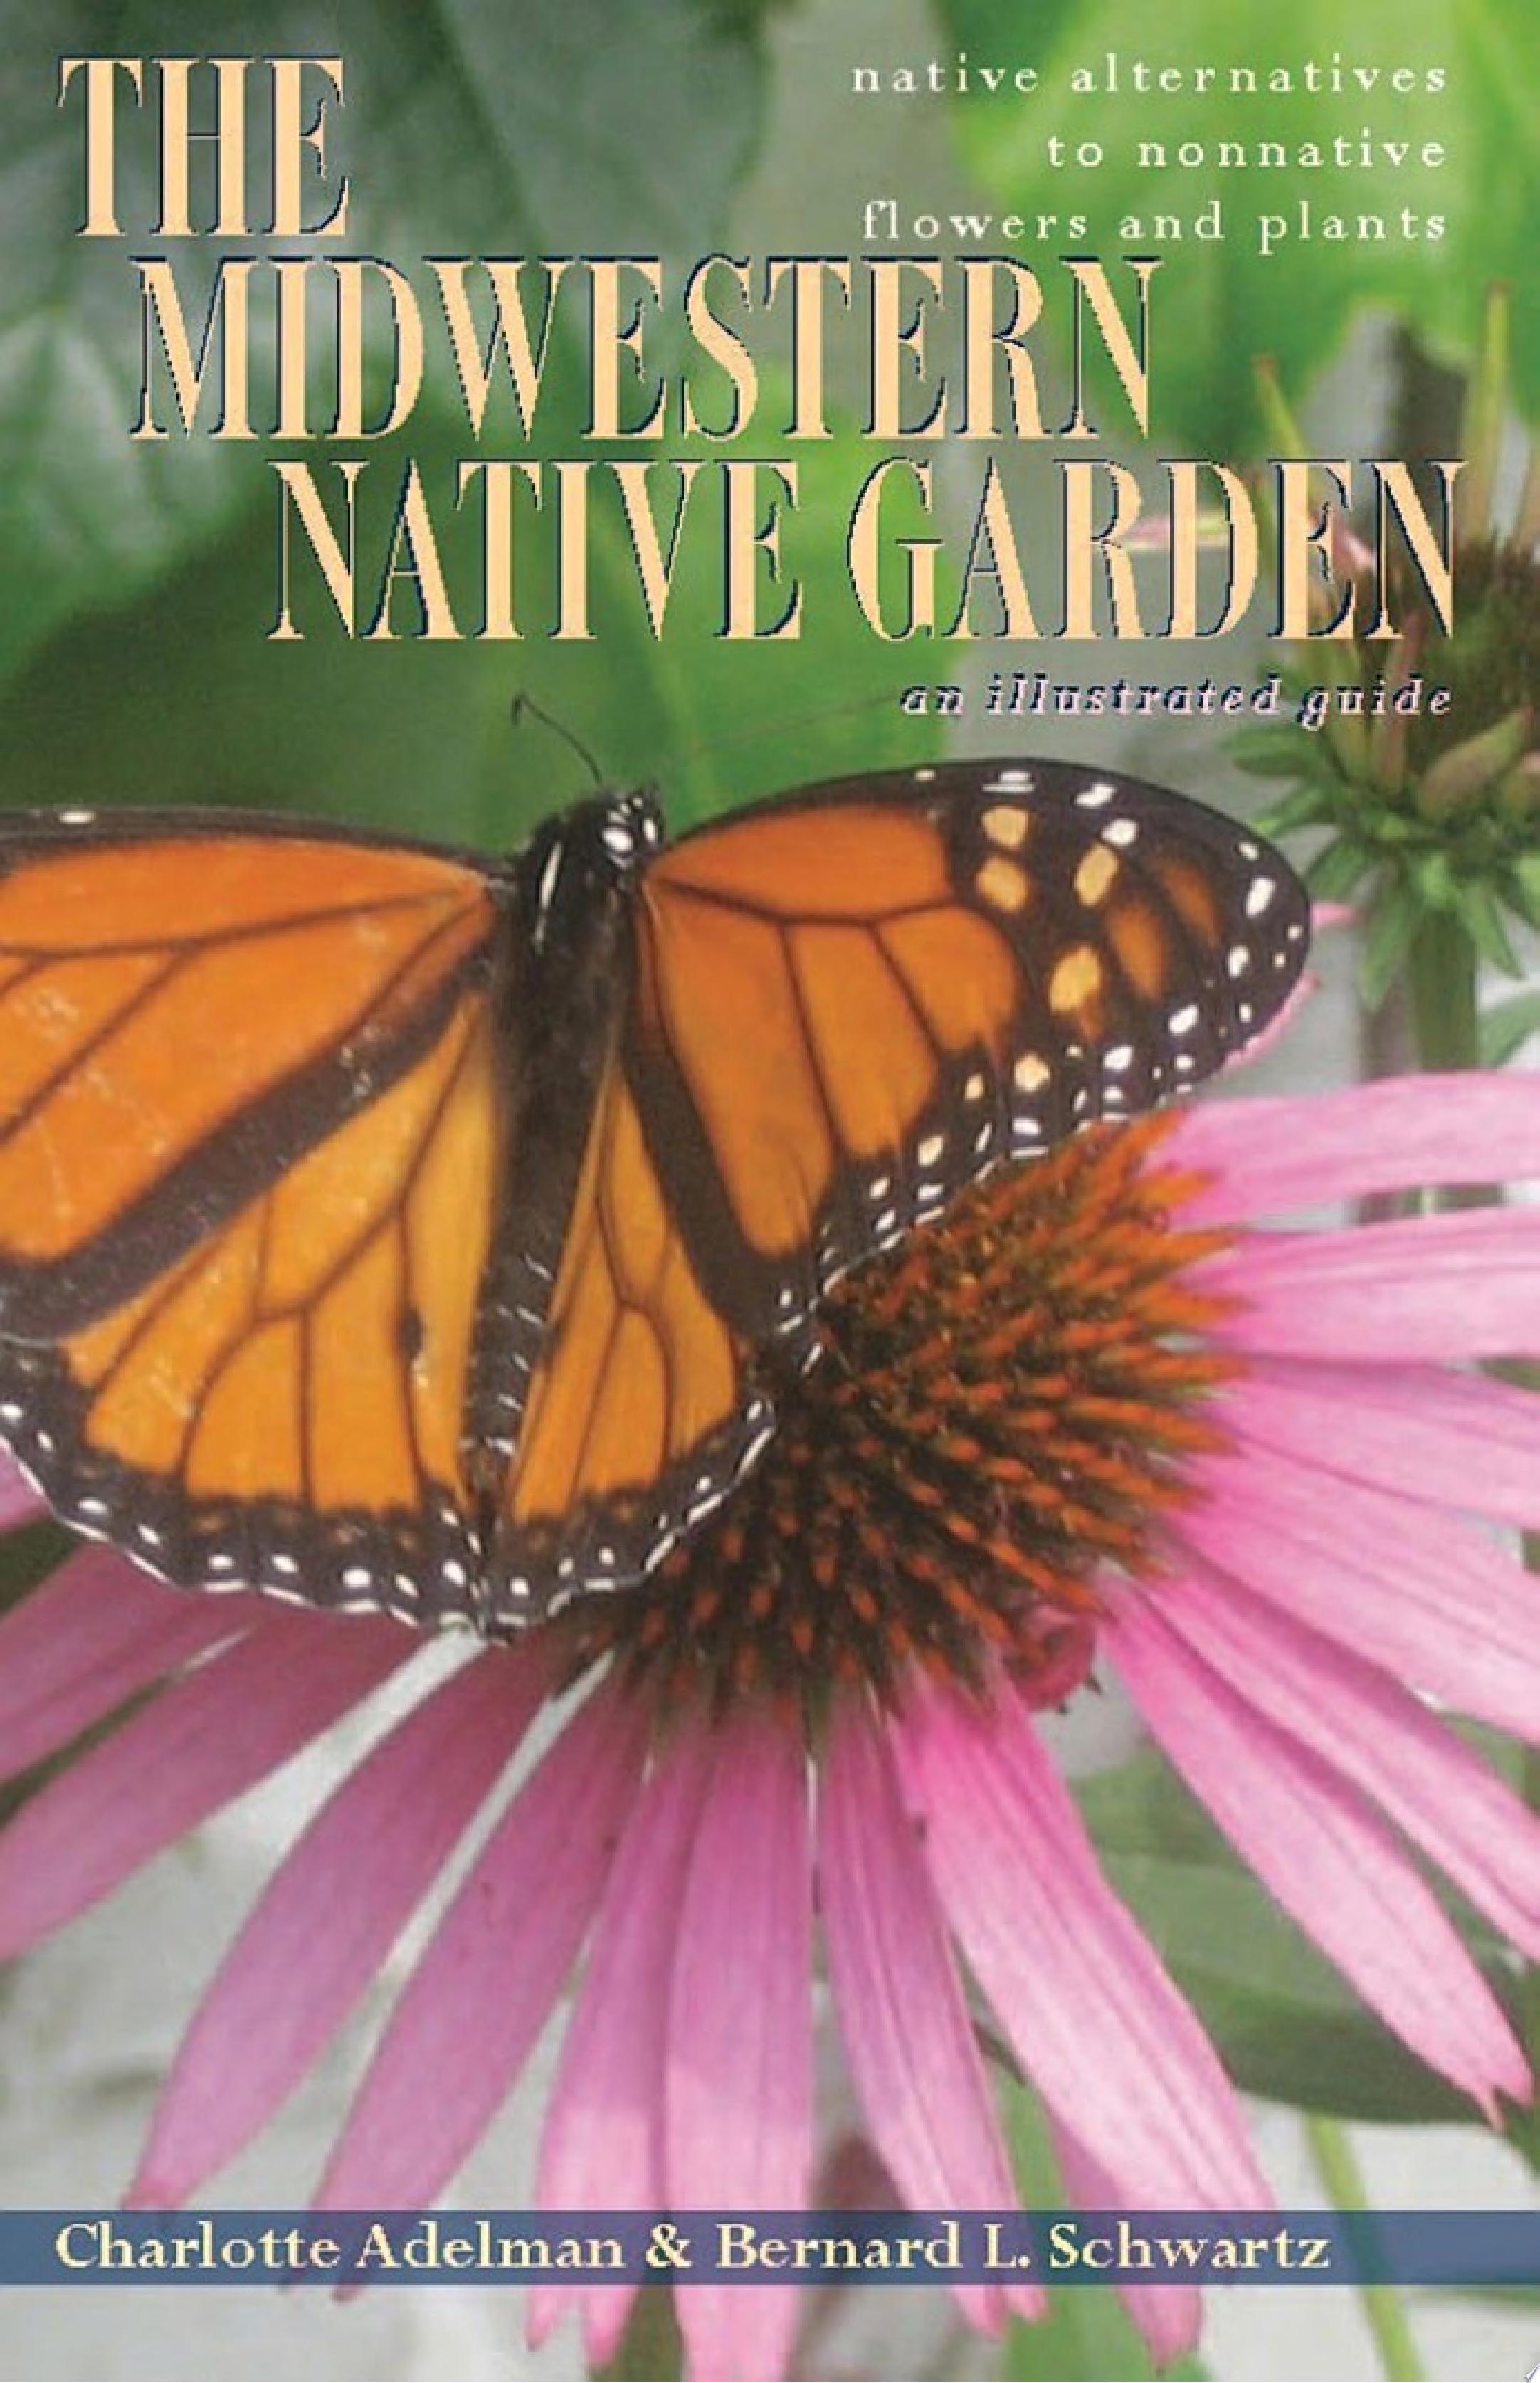 Image for "The Midwestern Native Garden"